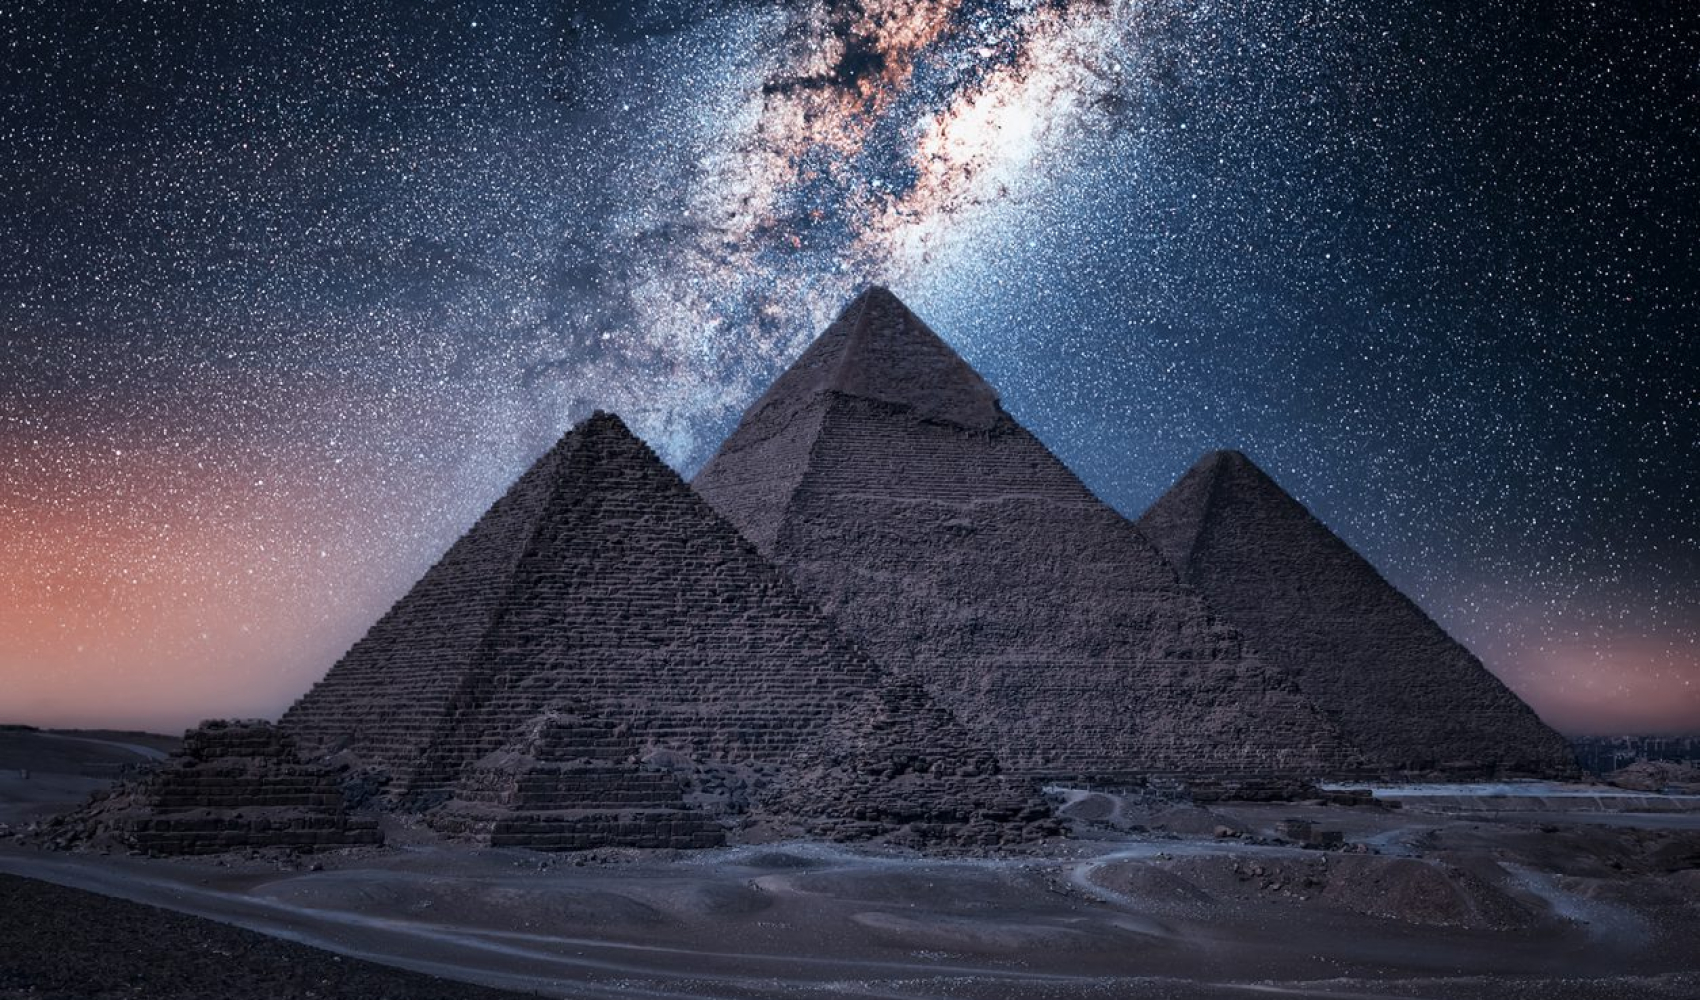 The Pyramids of Giza by night in Egypt